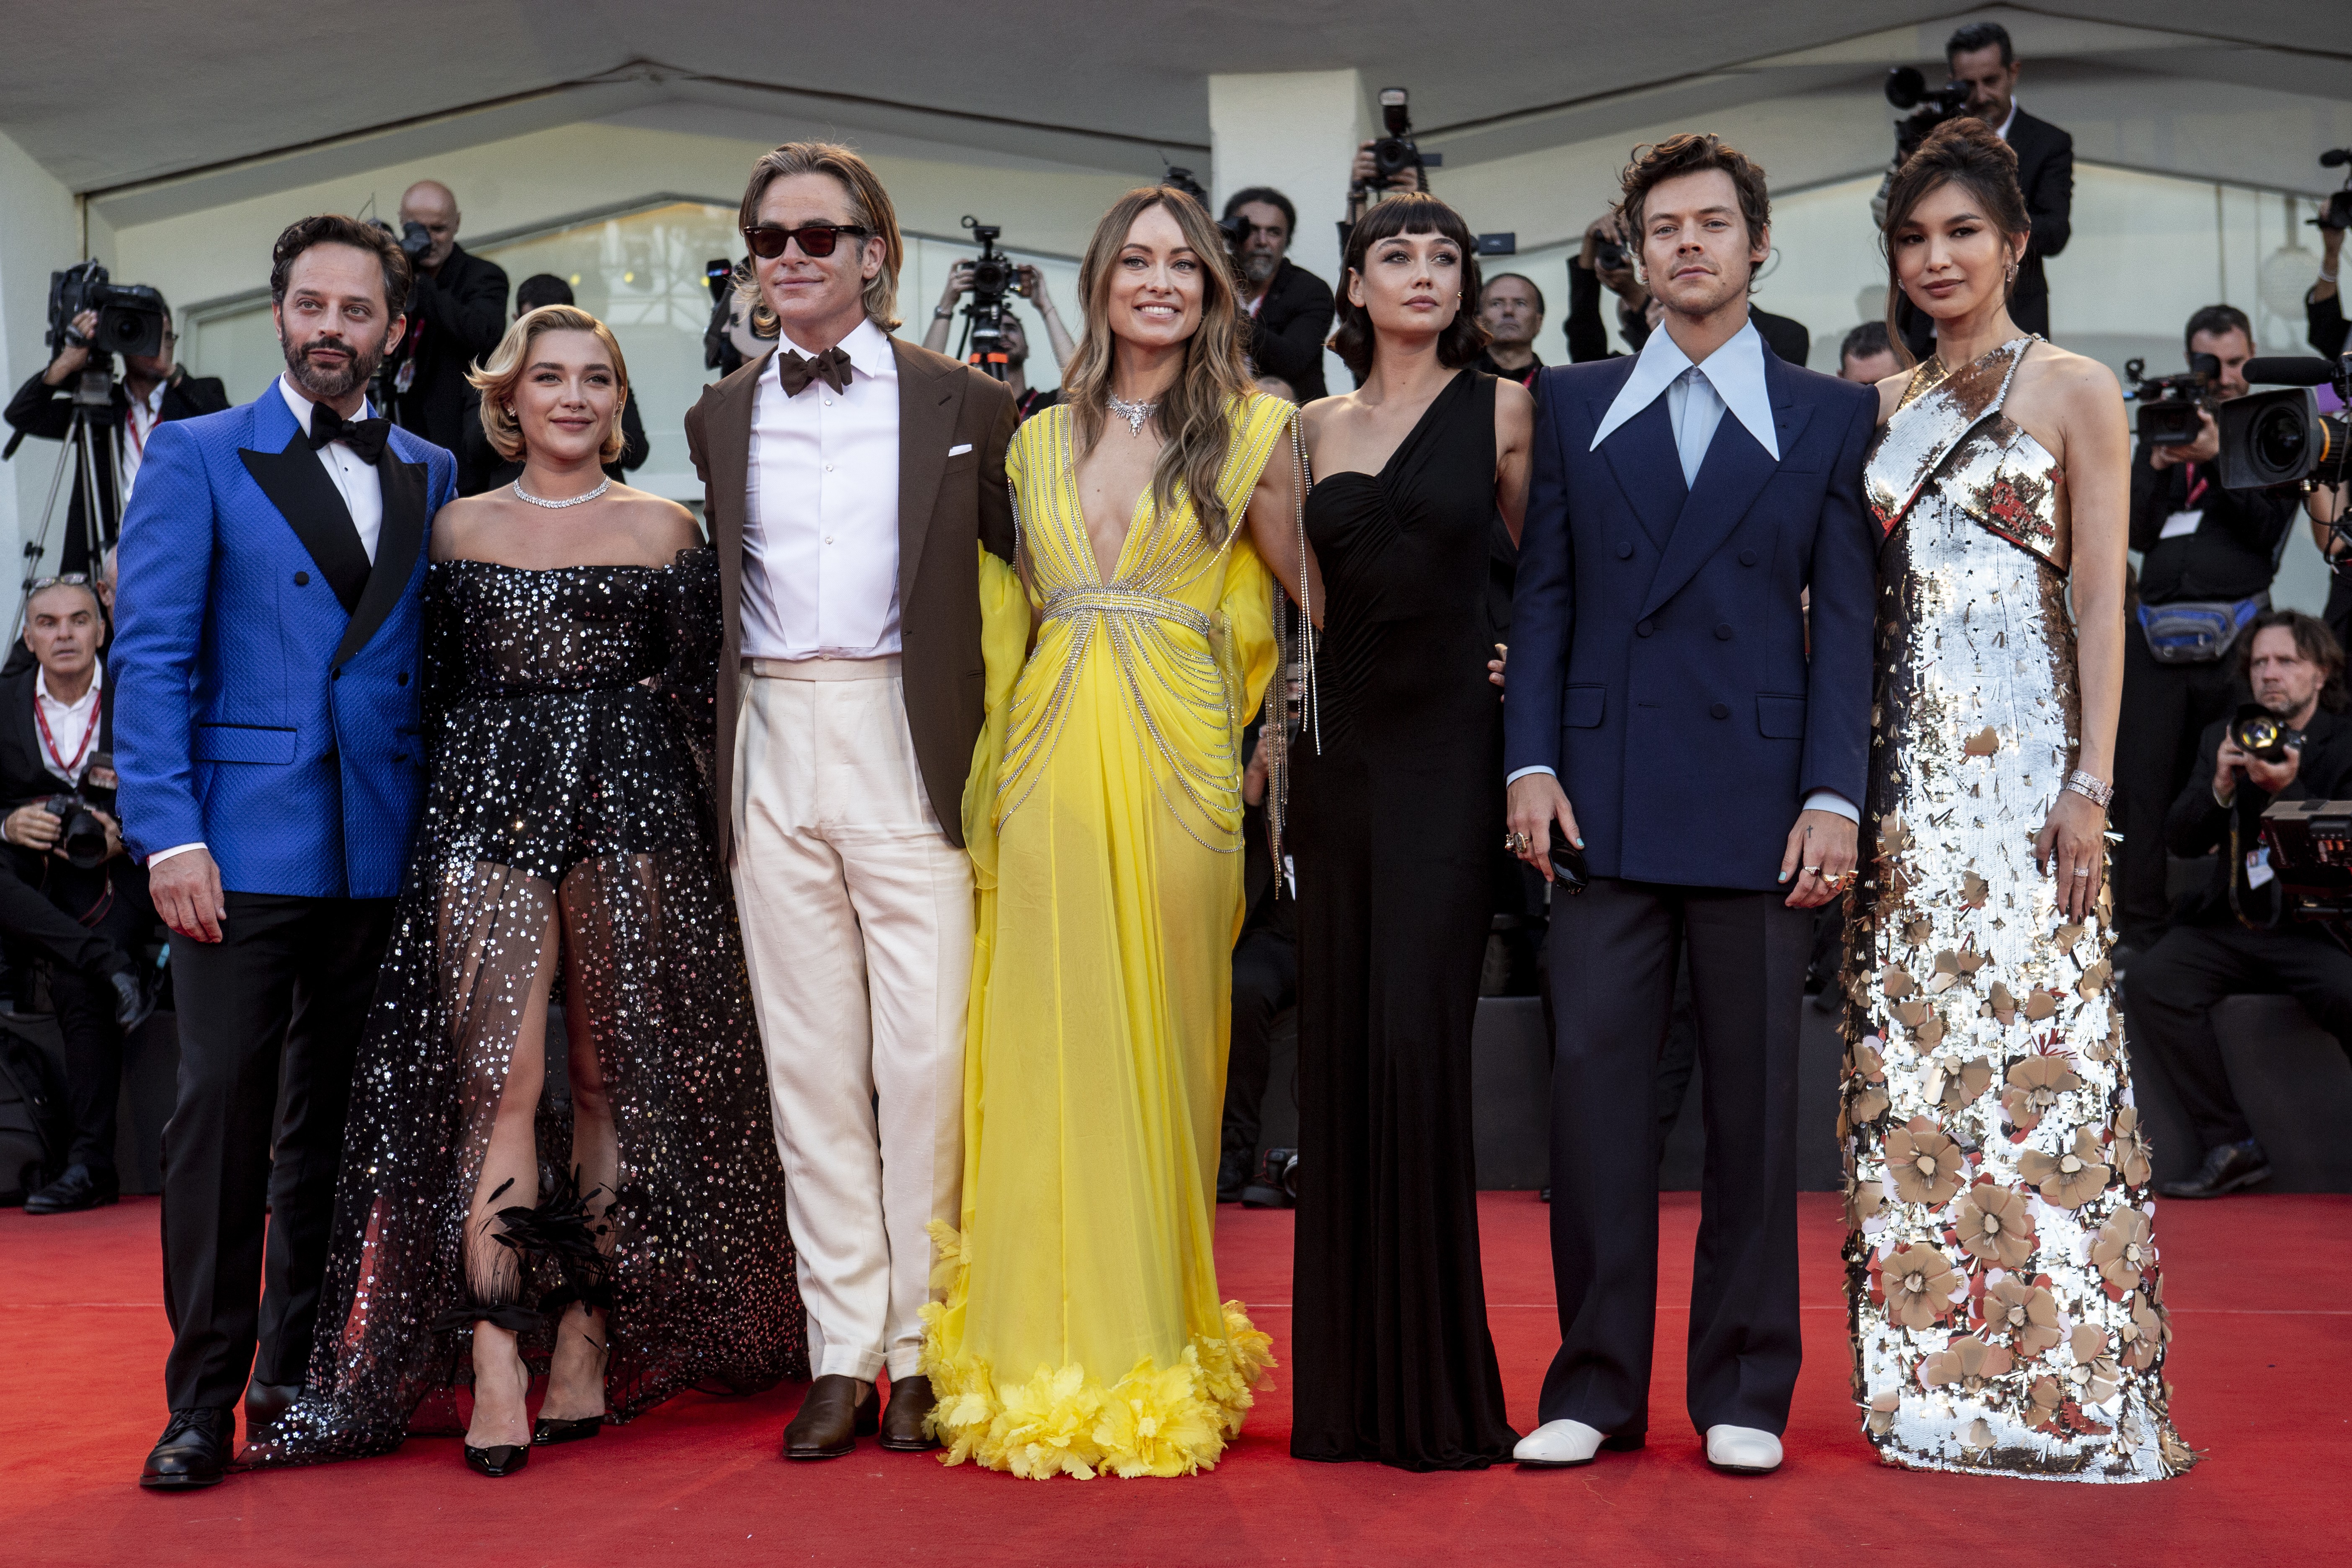 The cast of Don't Worry Darling: Nick Kroll, Florence Pugh, Chris Pine, Olivia Wilde, Sydney Chandler, Harry Styles and Gemma Chan on the red carpet at the Venice Film Festival (Photo: Getty Images)